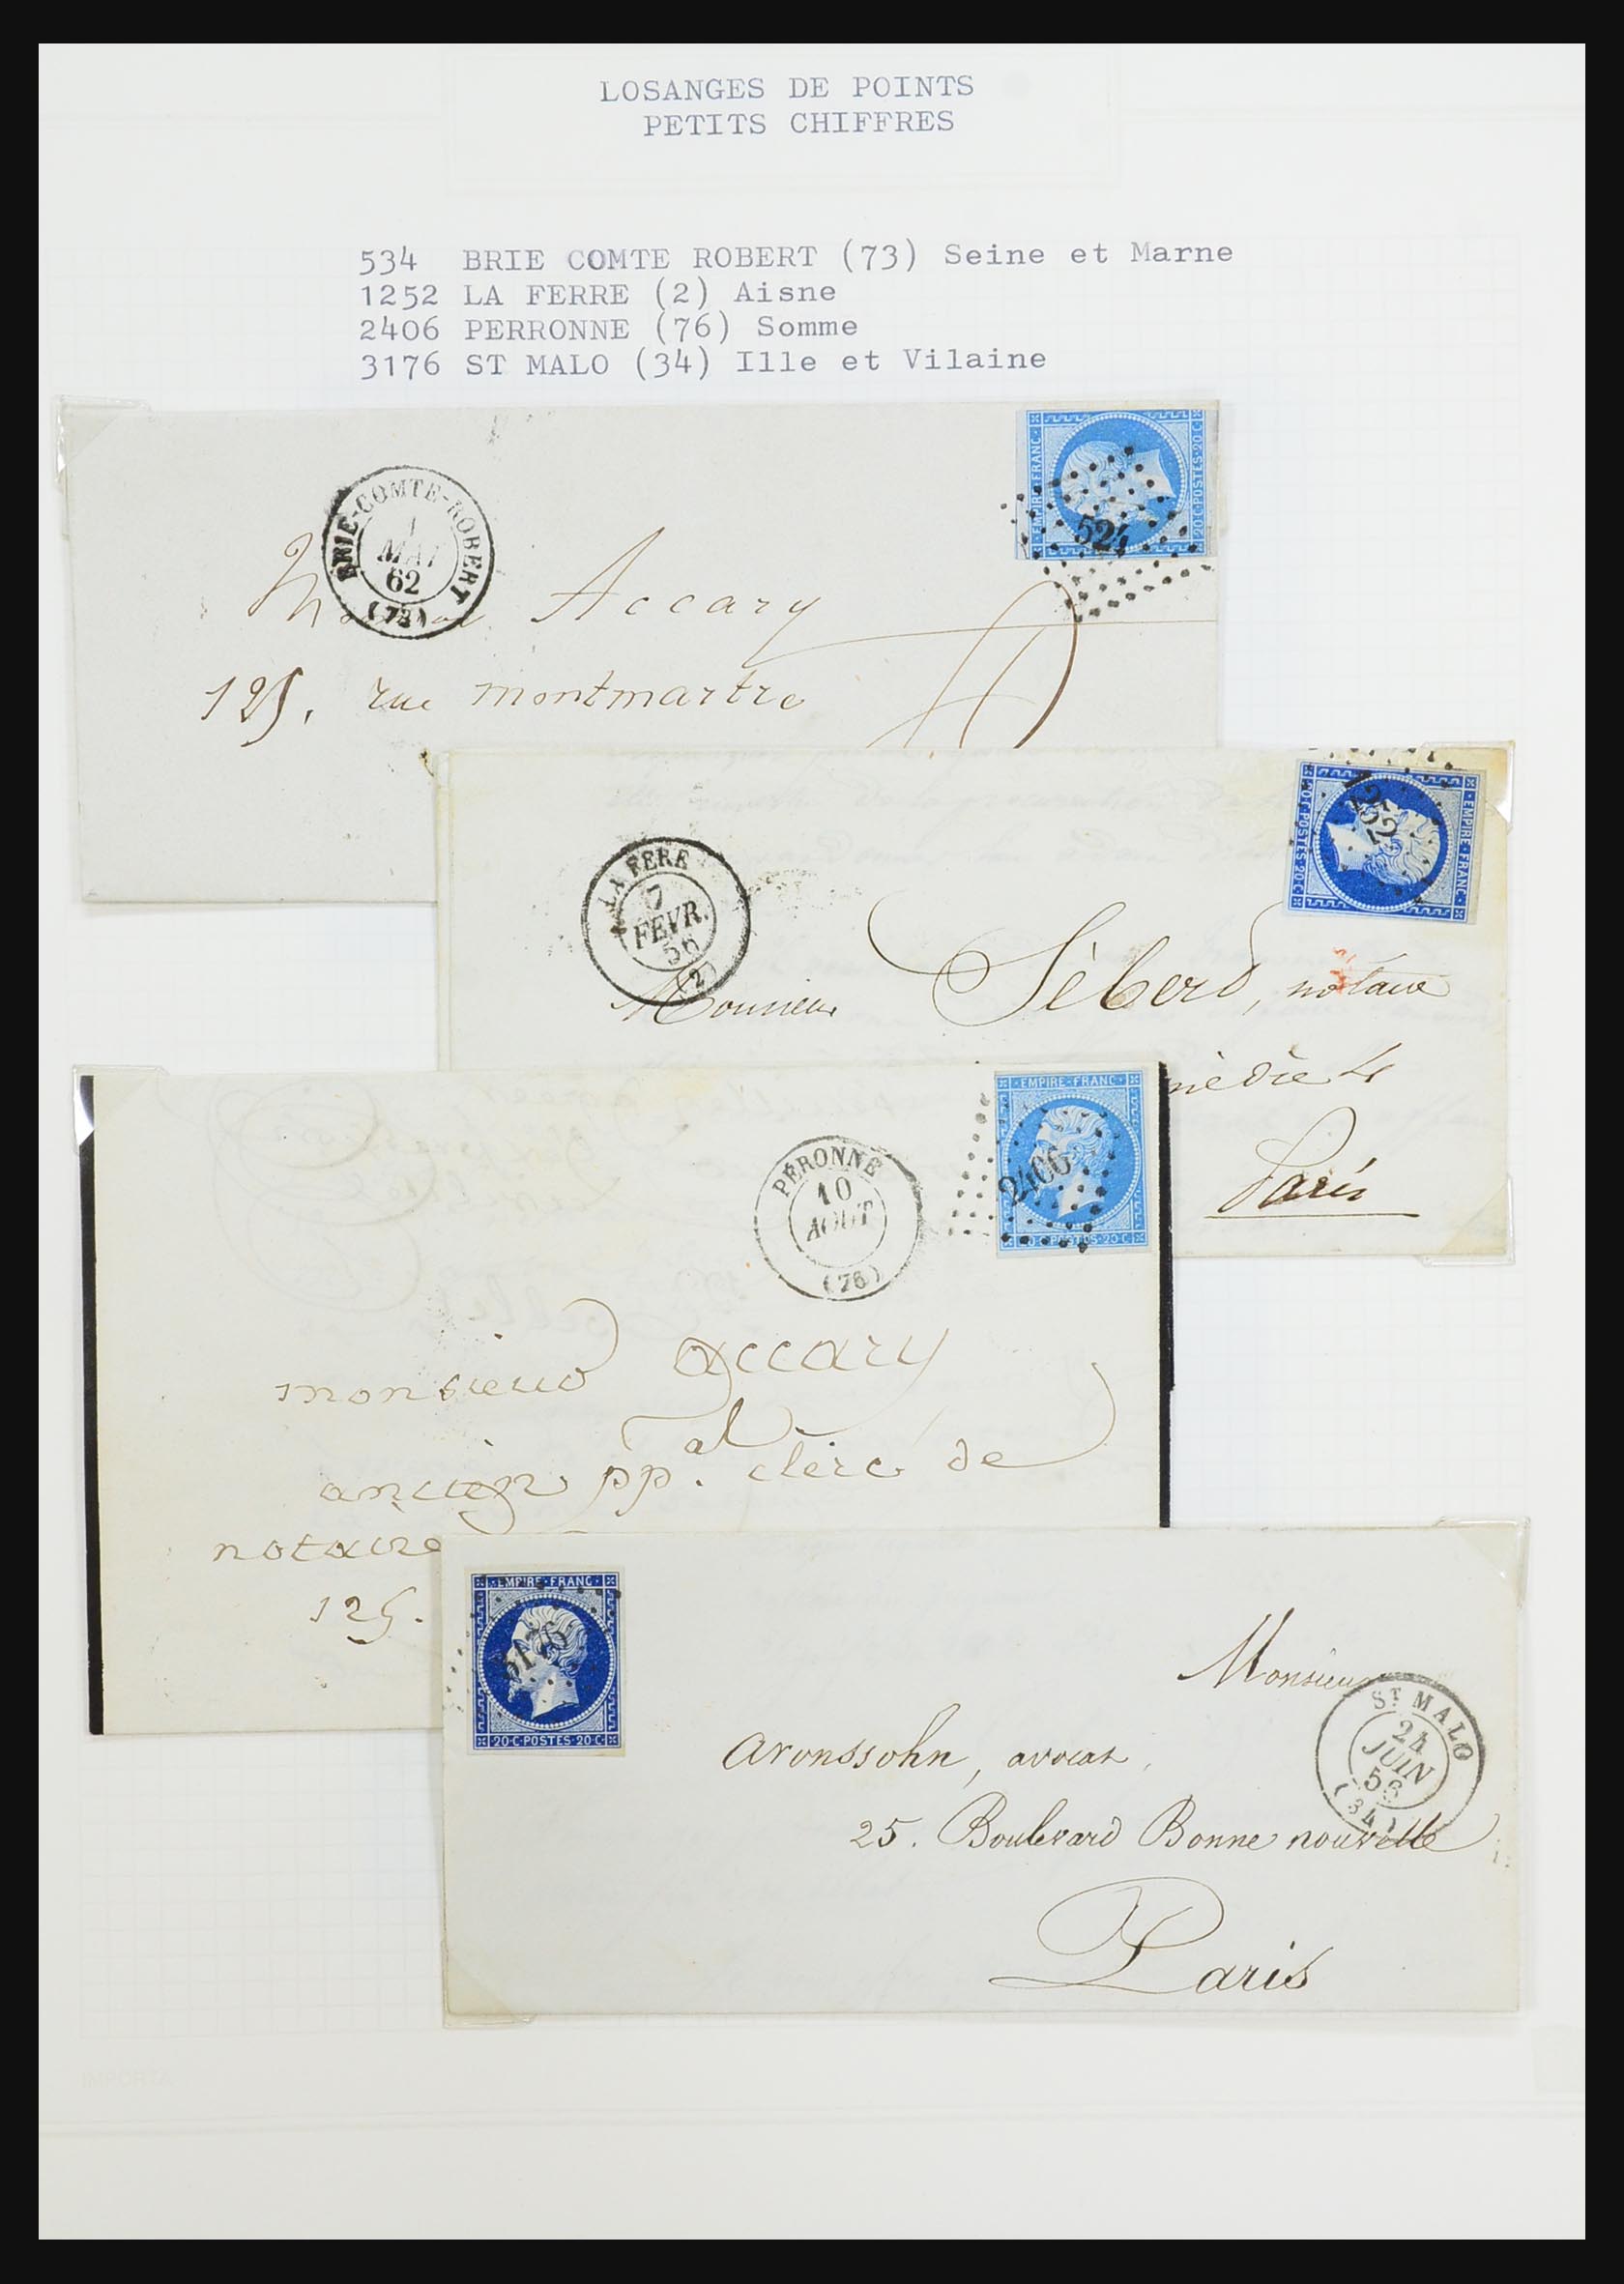 31526 033 - 31526 France covers and cancels 1725 (!)-1900.